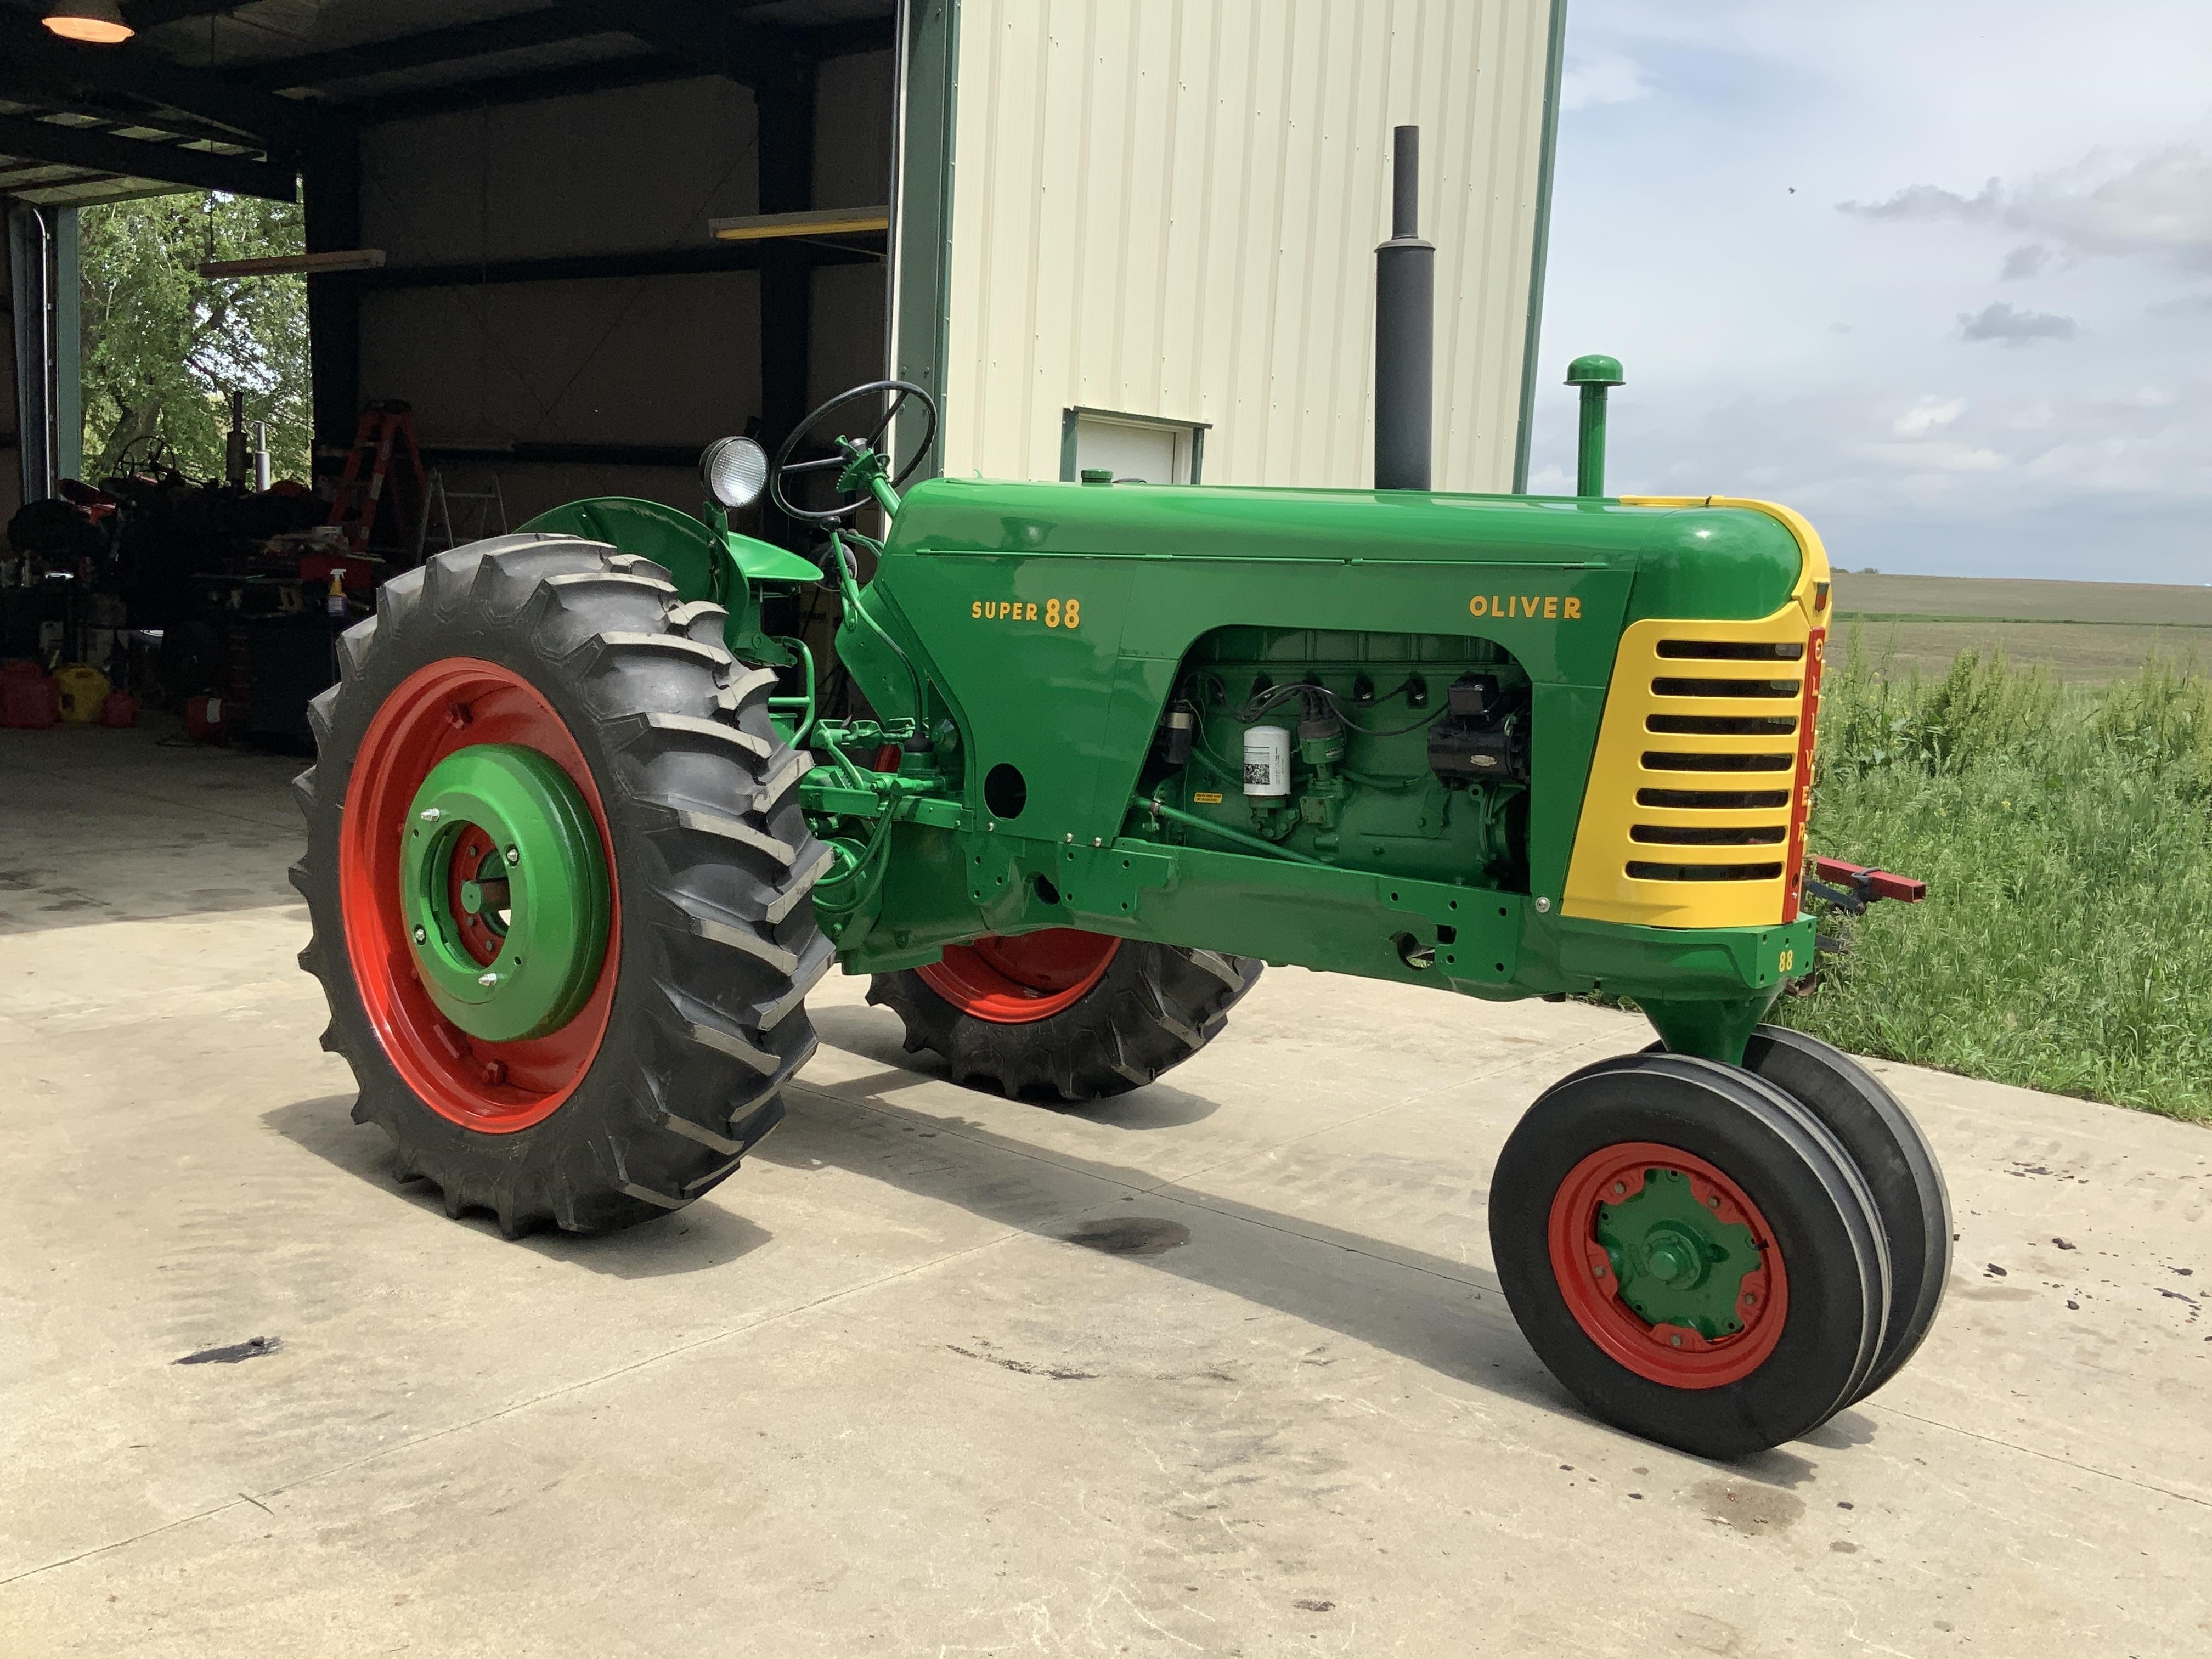 OLIVER SUPER 77 Tractors Auction Results